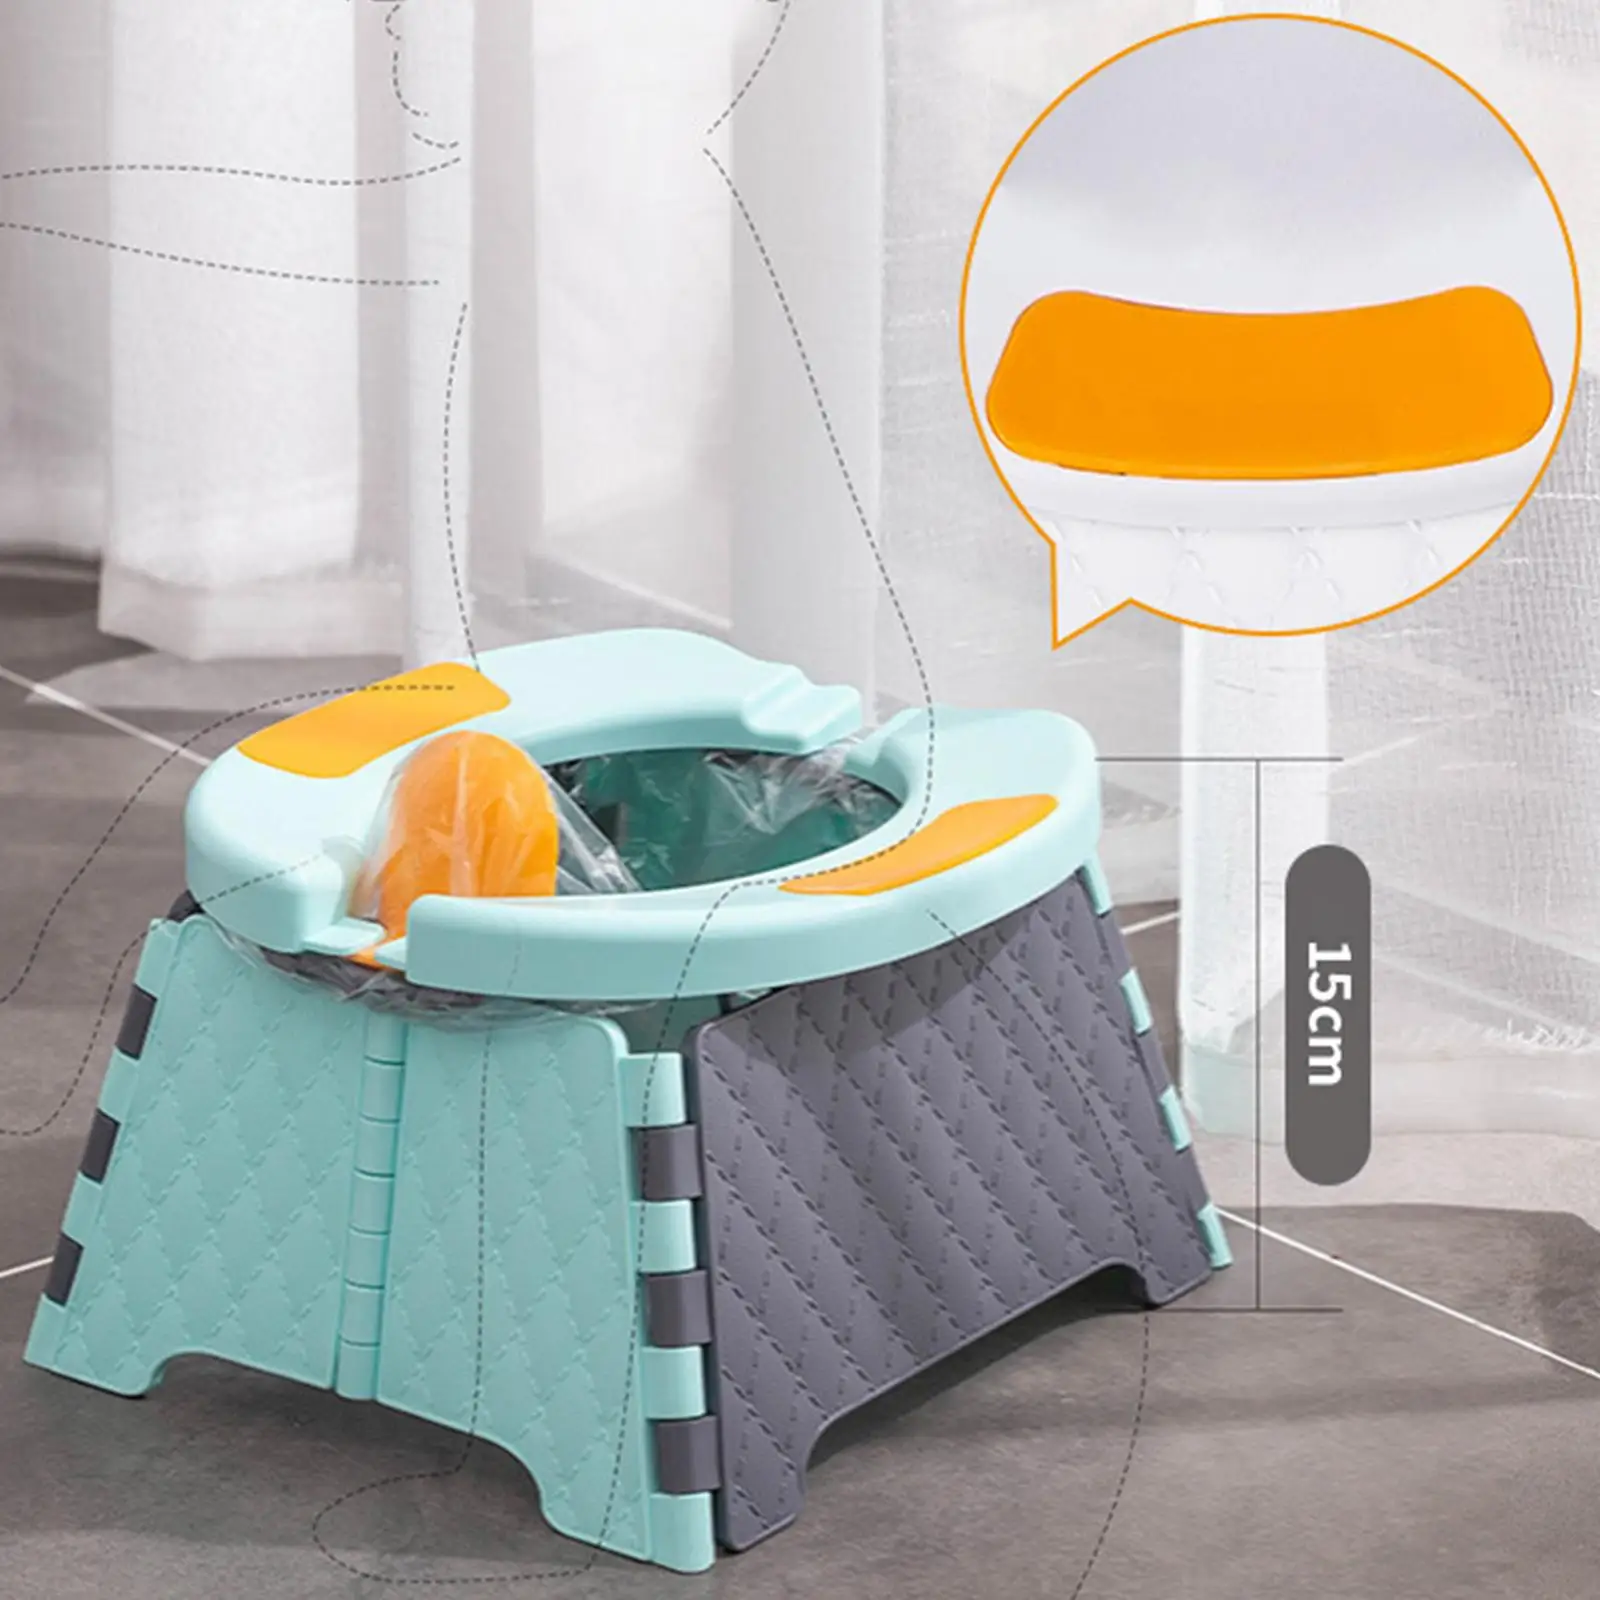 Portable Foldable Training Potty Seat  , for Camping, , Car Traveling etc Lightweight Convenience to Clean